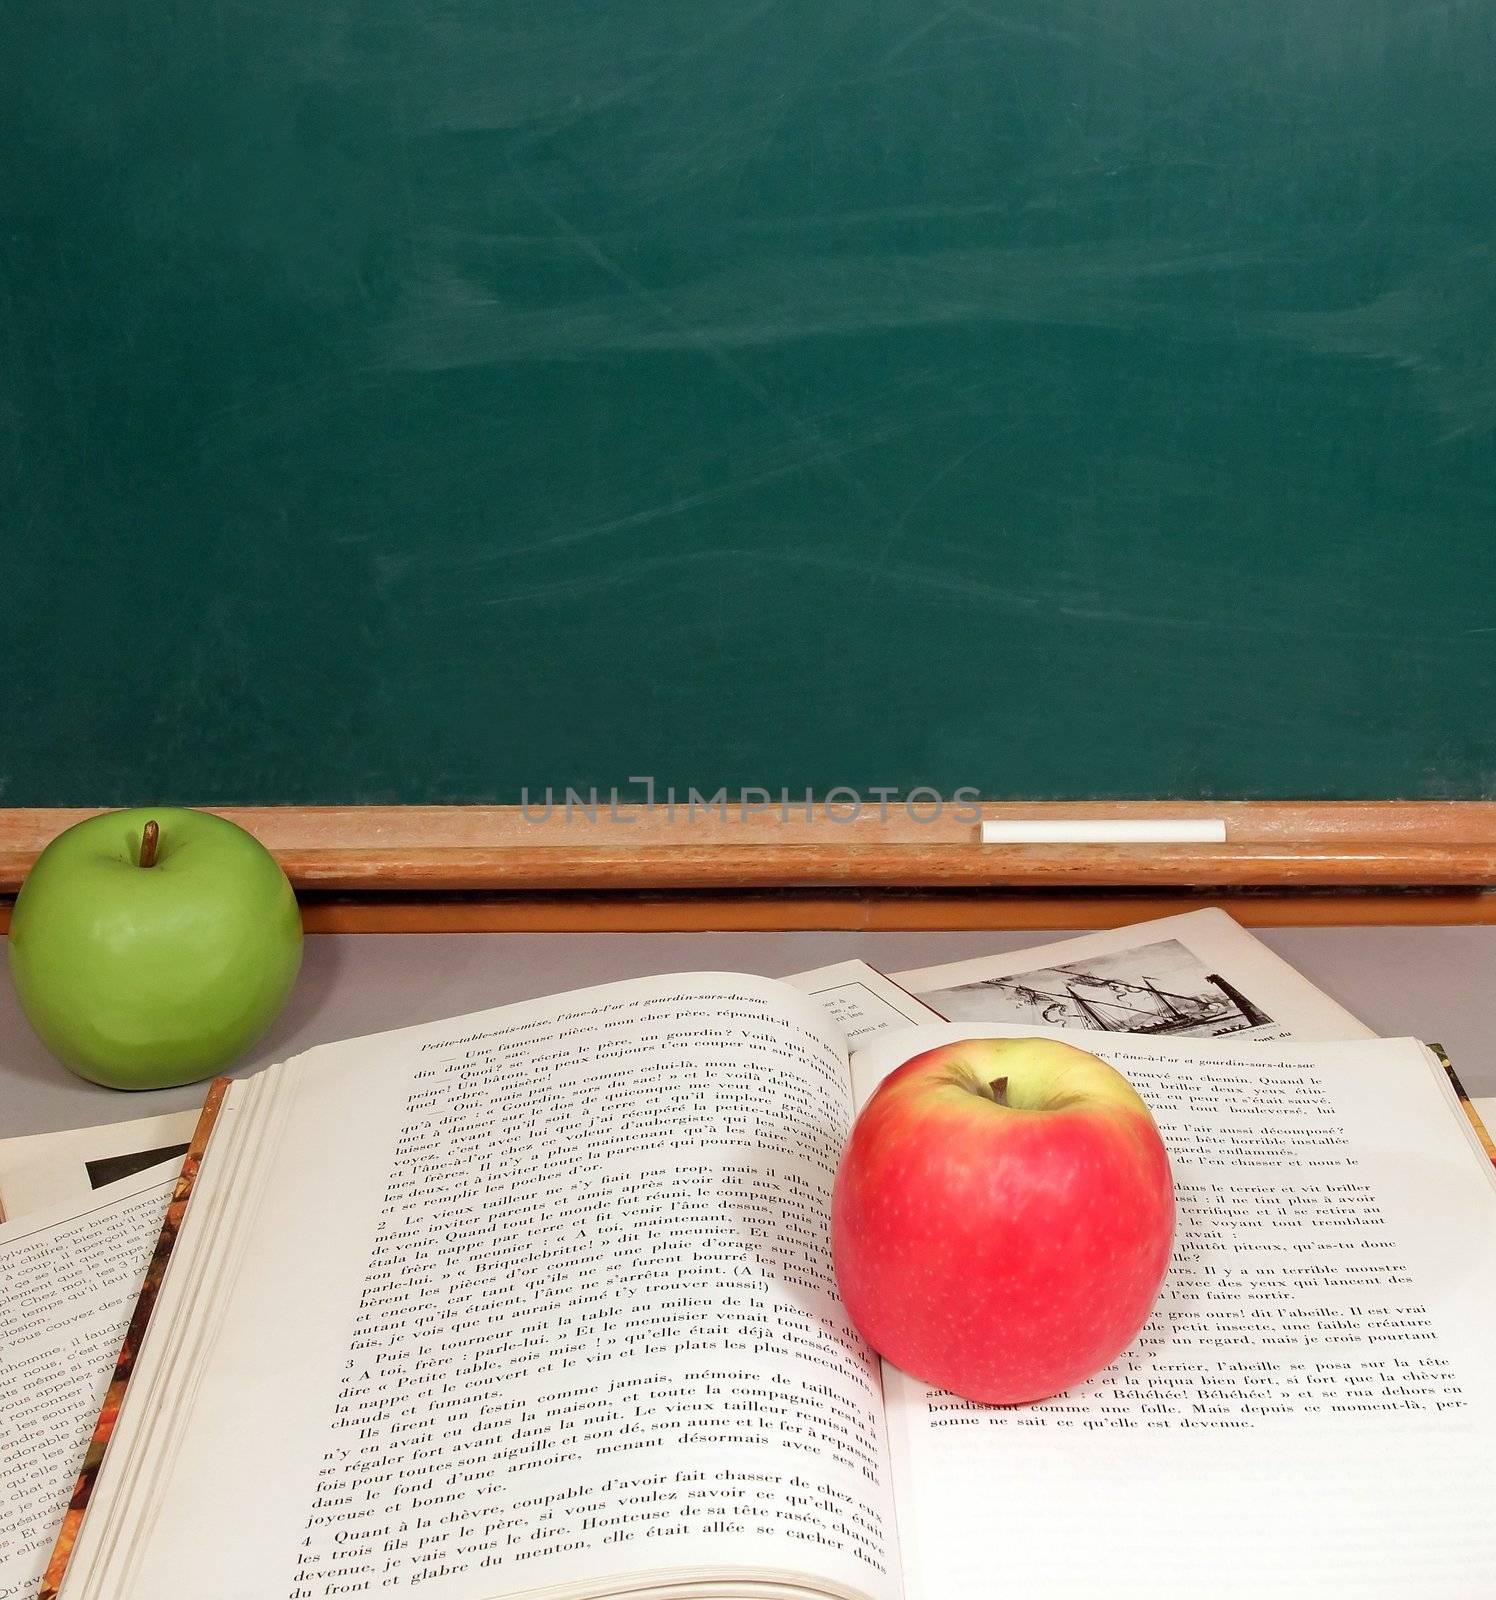 Apples of the knowledge, schoolbooks and blackboard Metaphor  the green apple of the departure will become red at the end of schooling by neko92vl